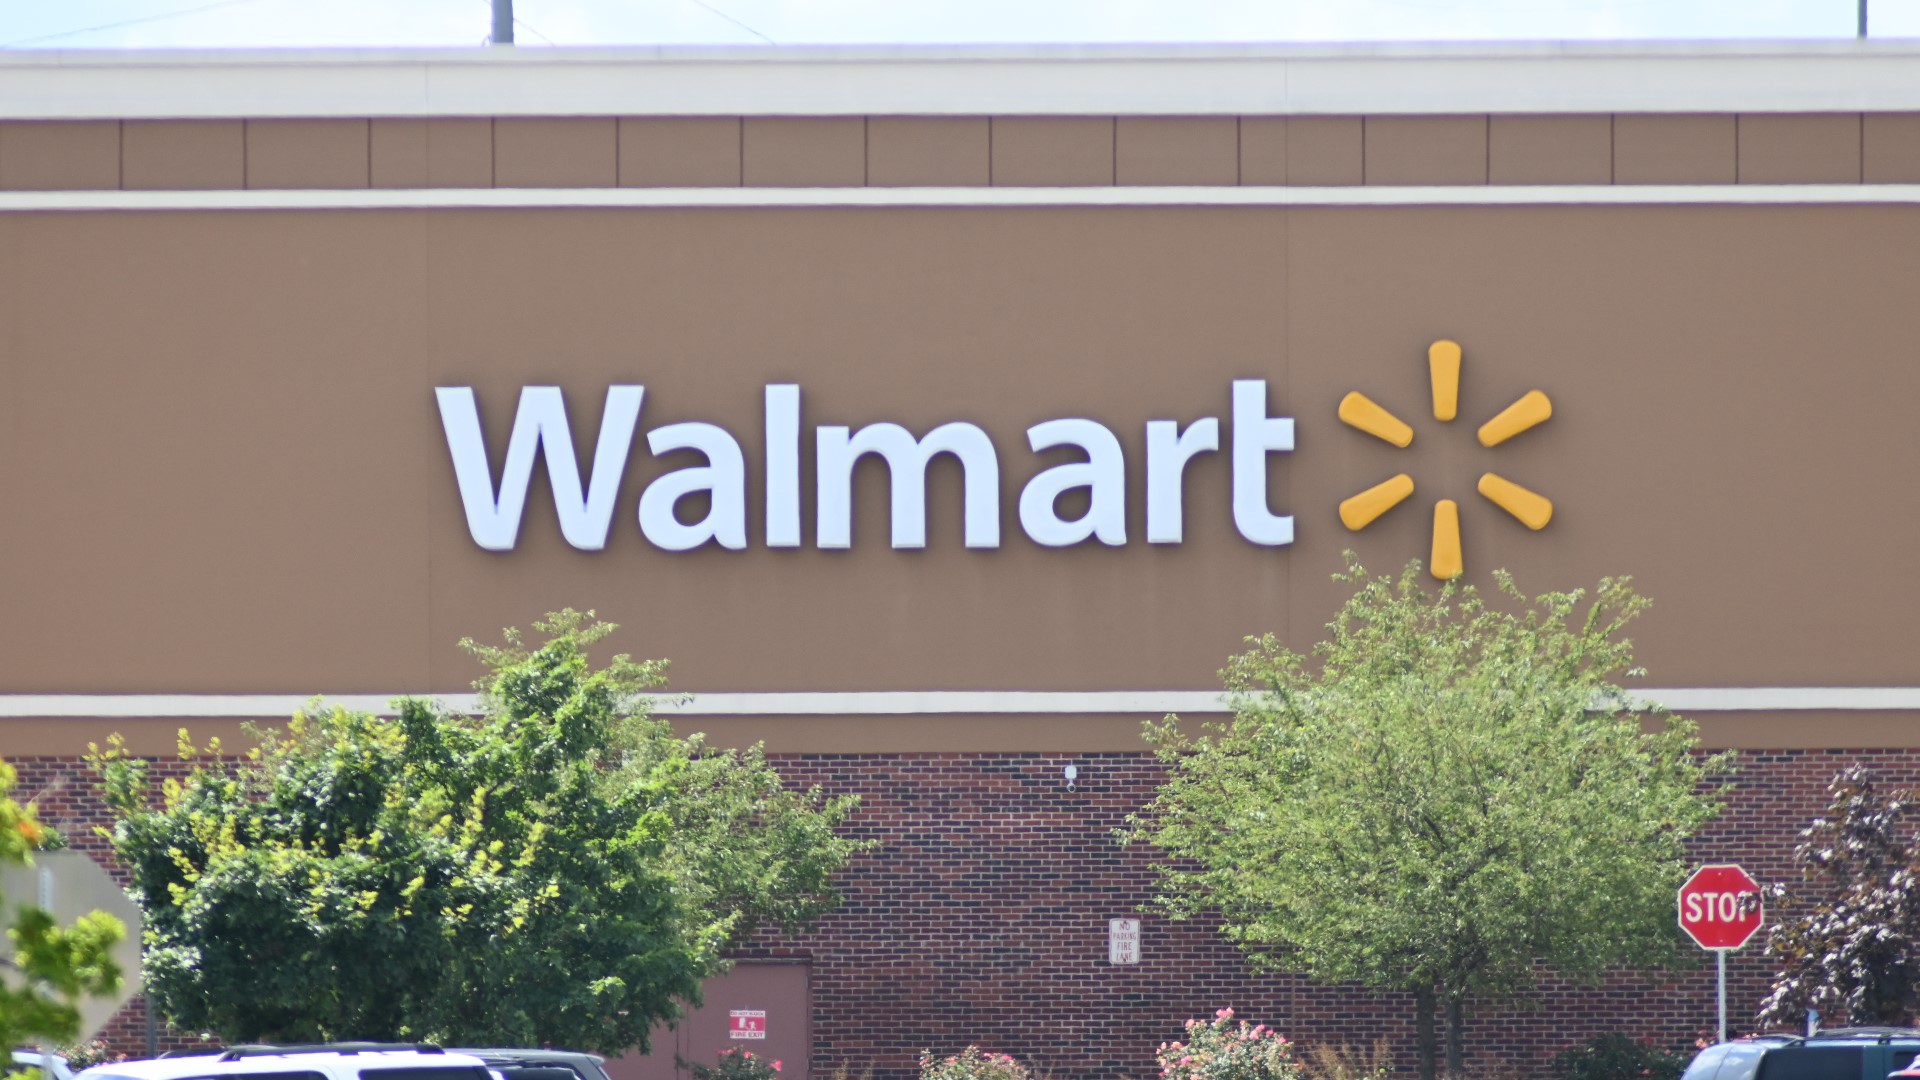 Walmart said the decision was made after the company found the location did not meet its financial expectations.